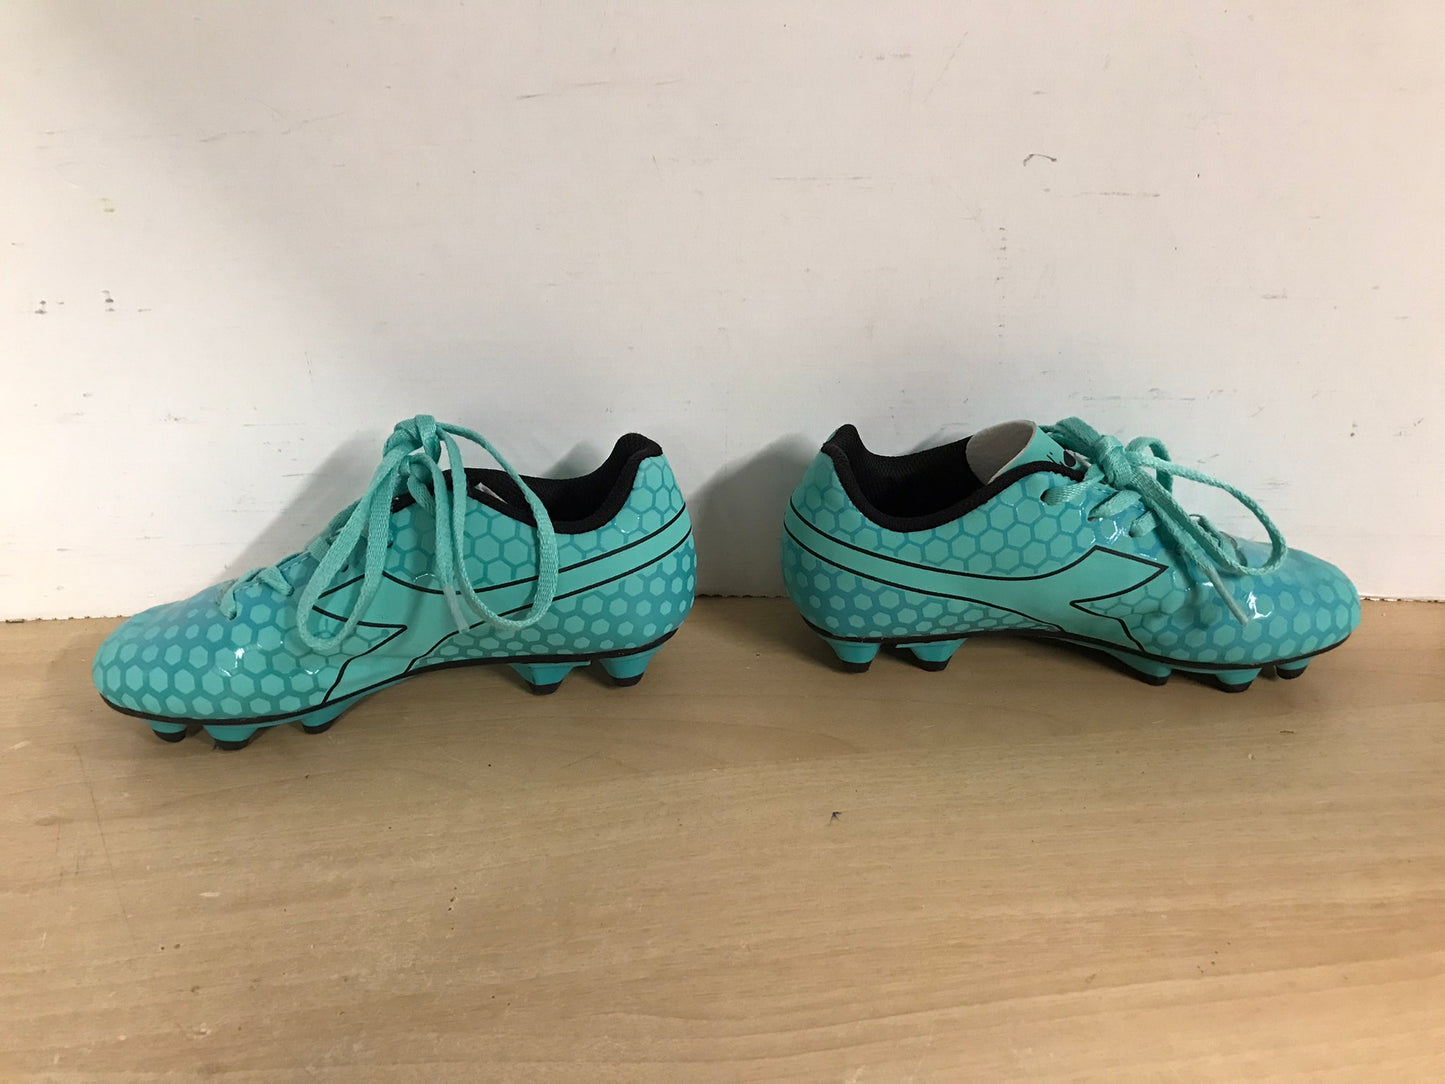 Soccer Shoes Cleats Child Size 1 Adidas Blue Teal Black New Demo Model